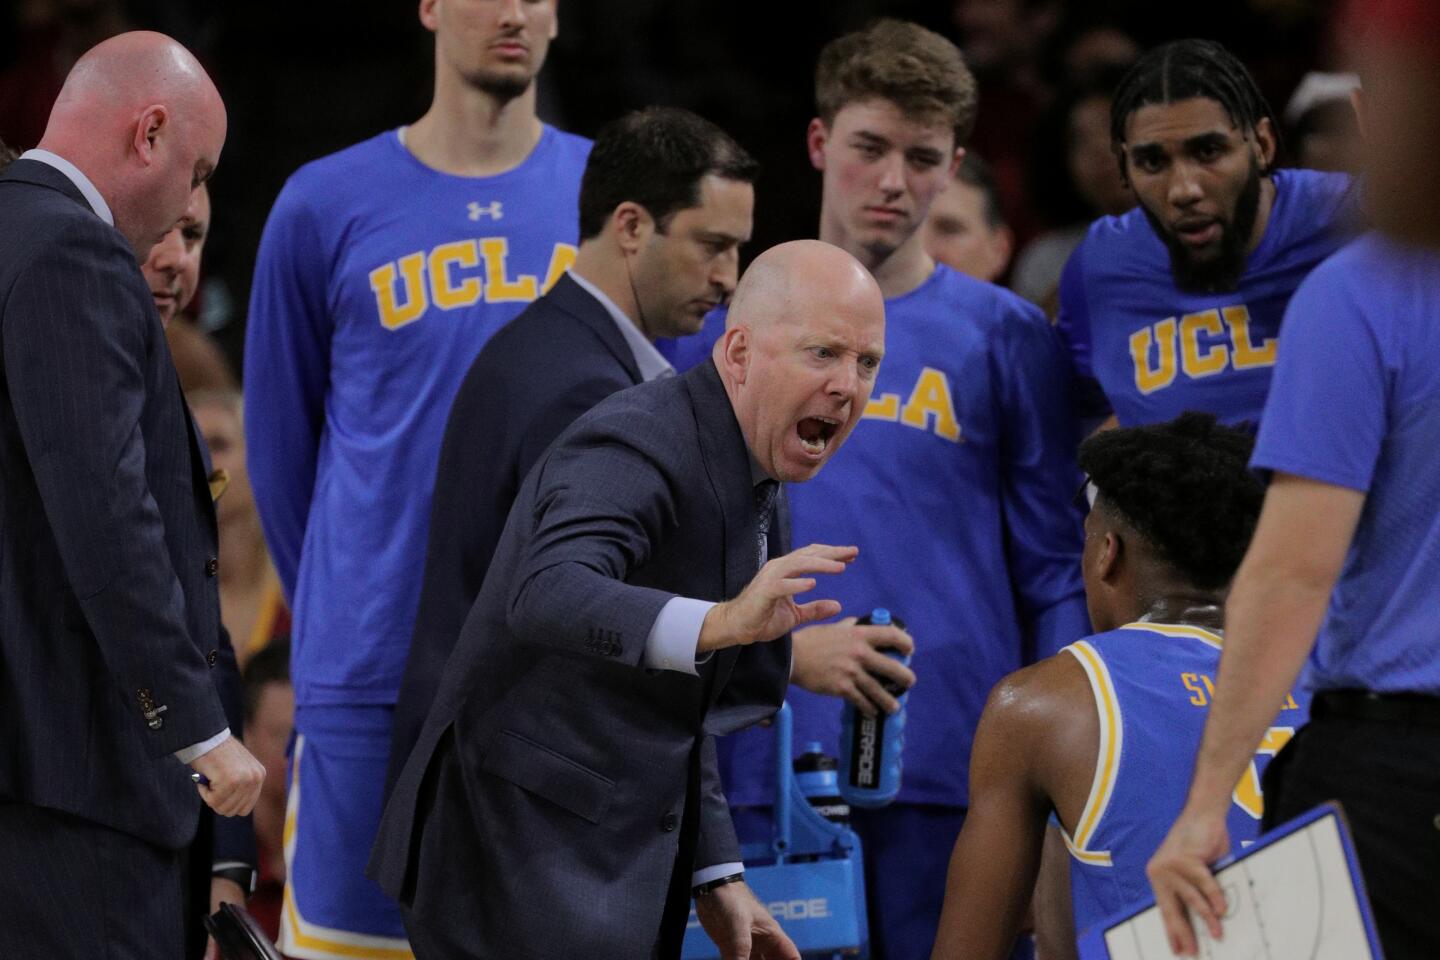 UCLA coach Mick Cronin speaks to his players following defensive lapses by the Bruins in their loss to USC at Galen Center on March 7, 2020.